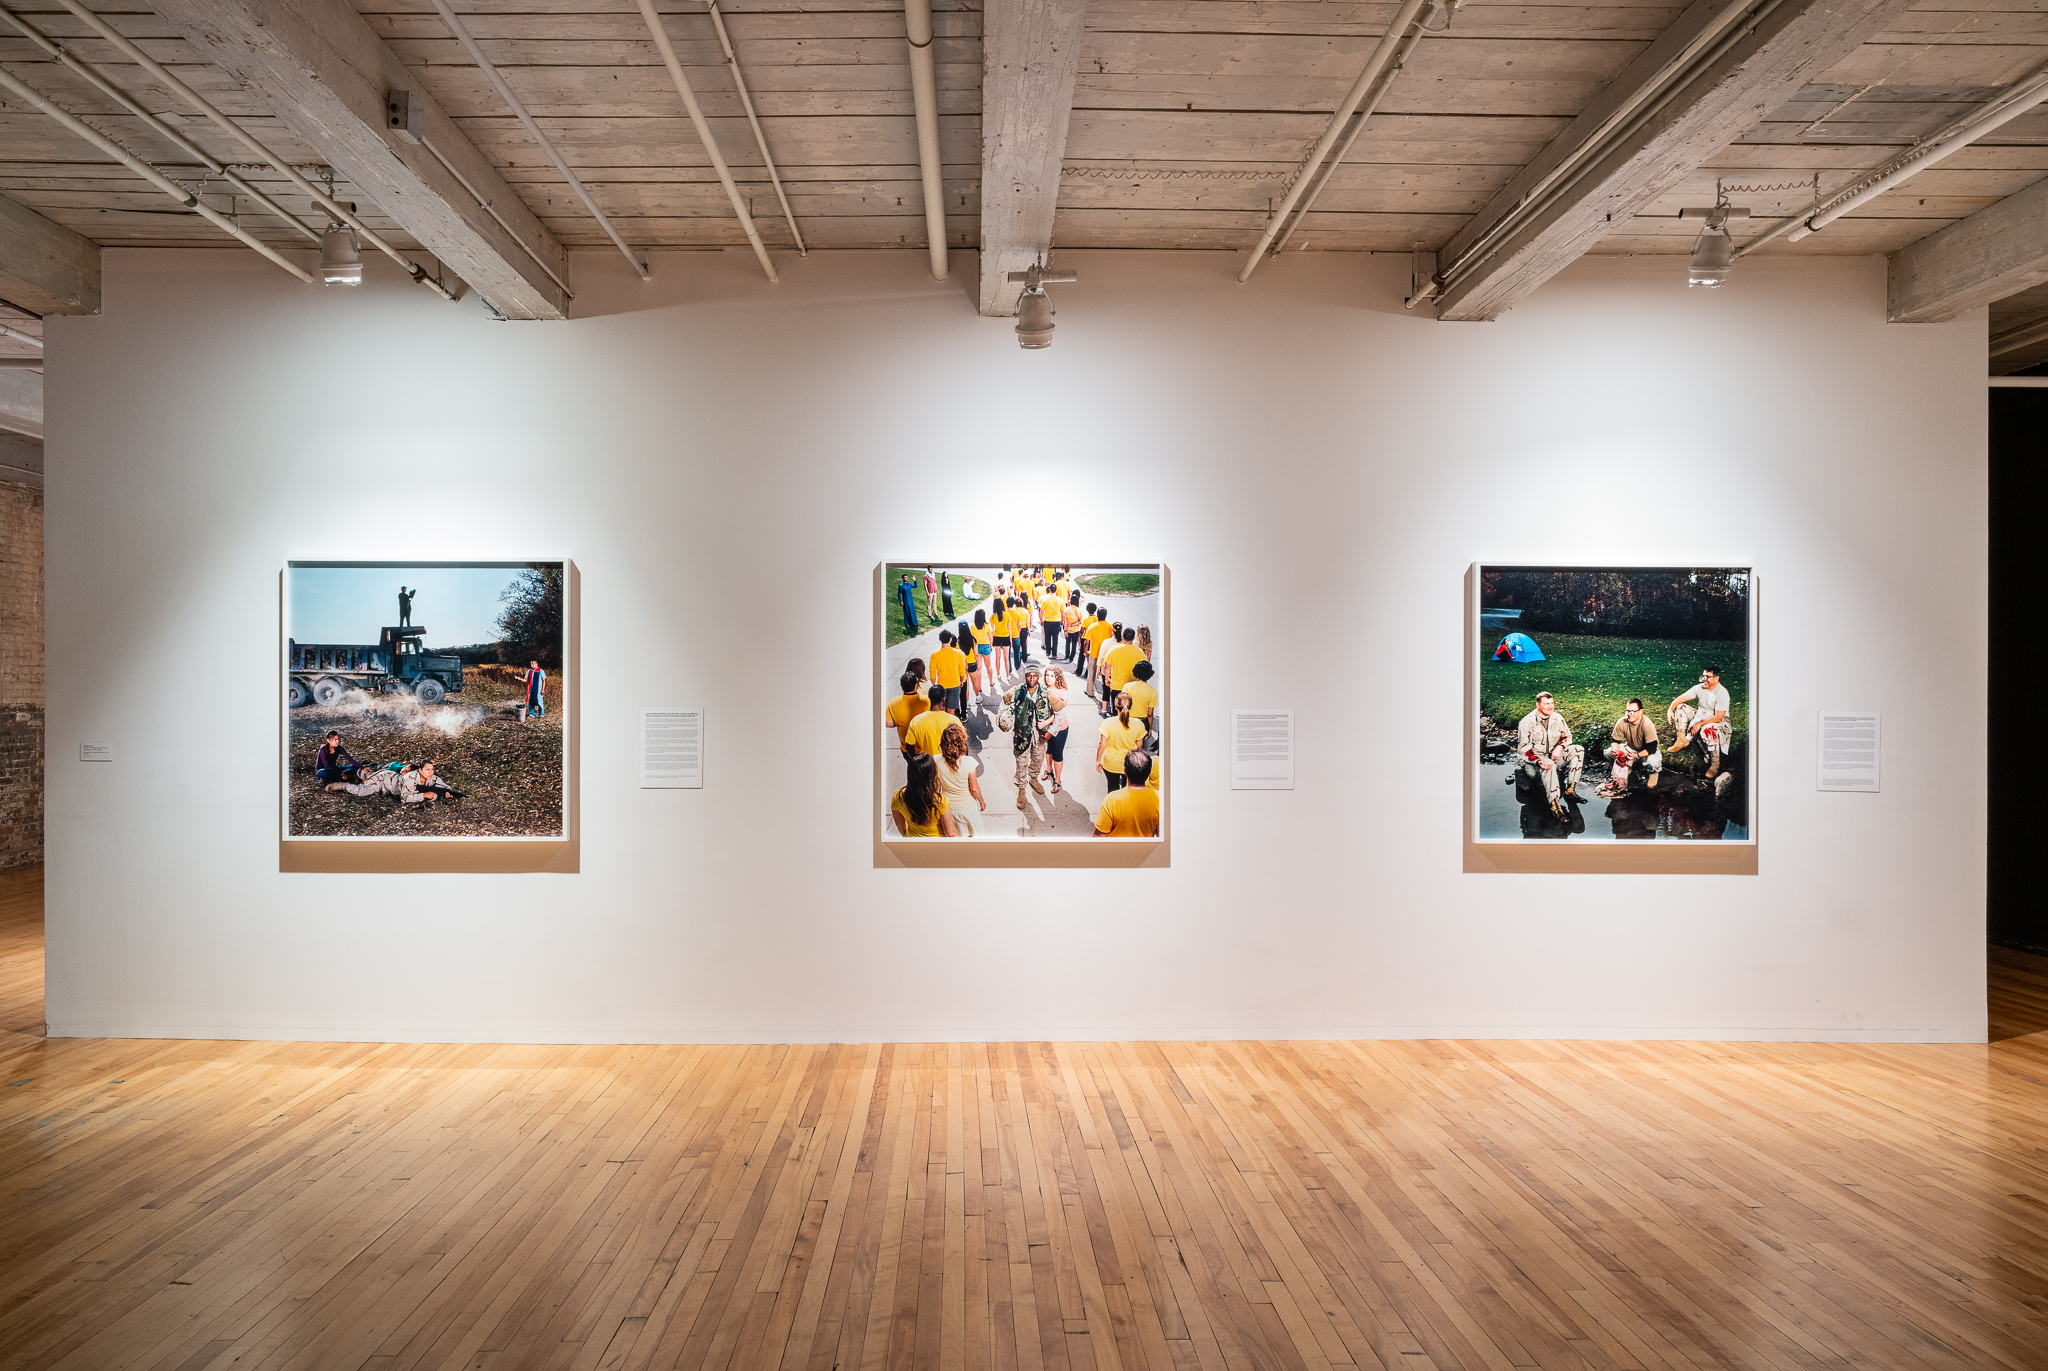 Photograph of Jennifer Karady images, as installed in the exhibition 'Suffering From Realness' at MASS MoCA.